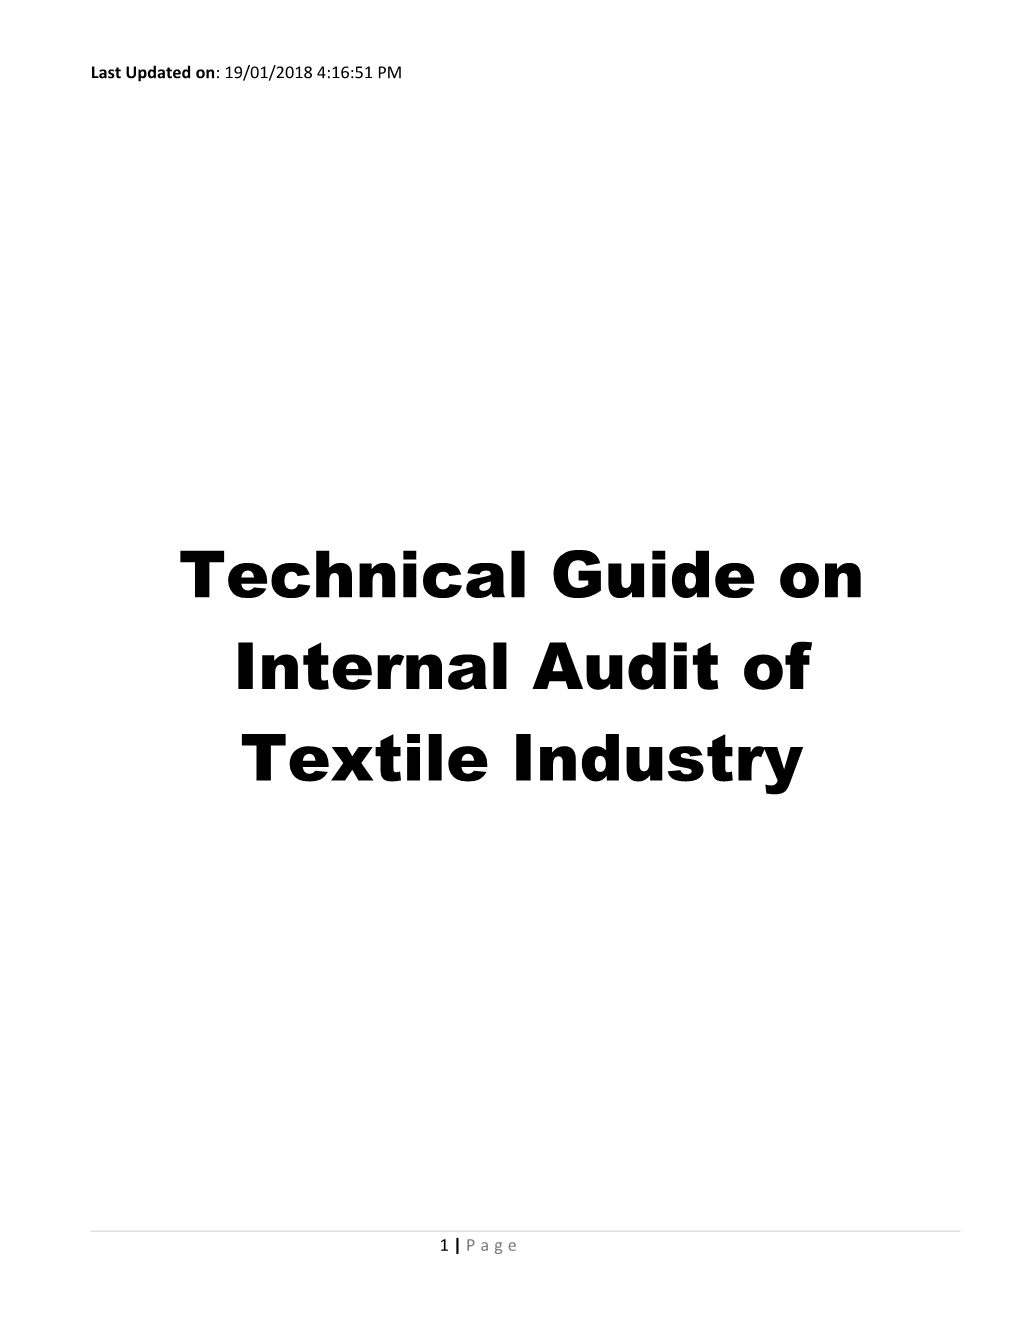 Technical Guide on Internal Audit of Textile Industry